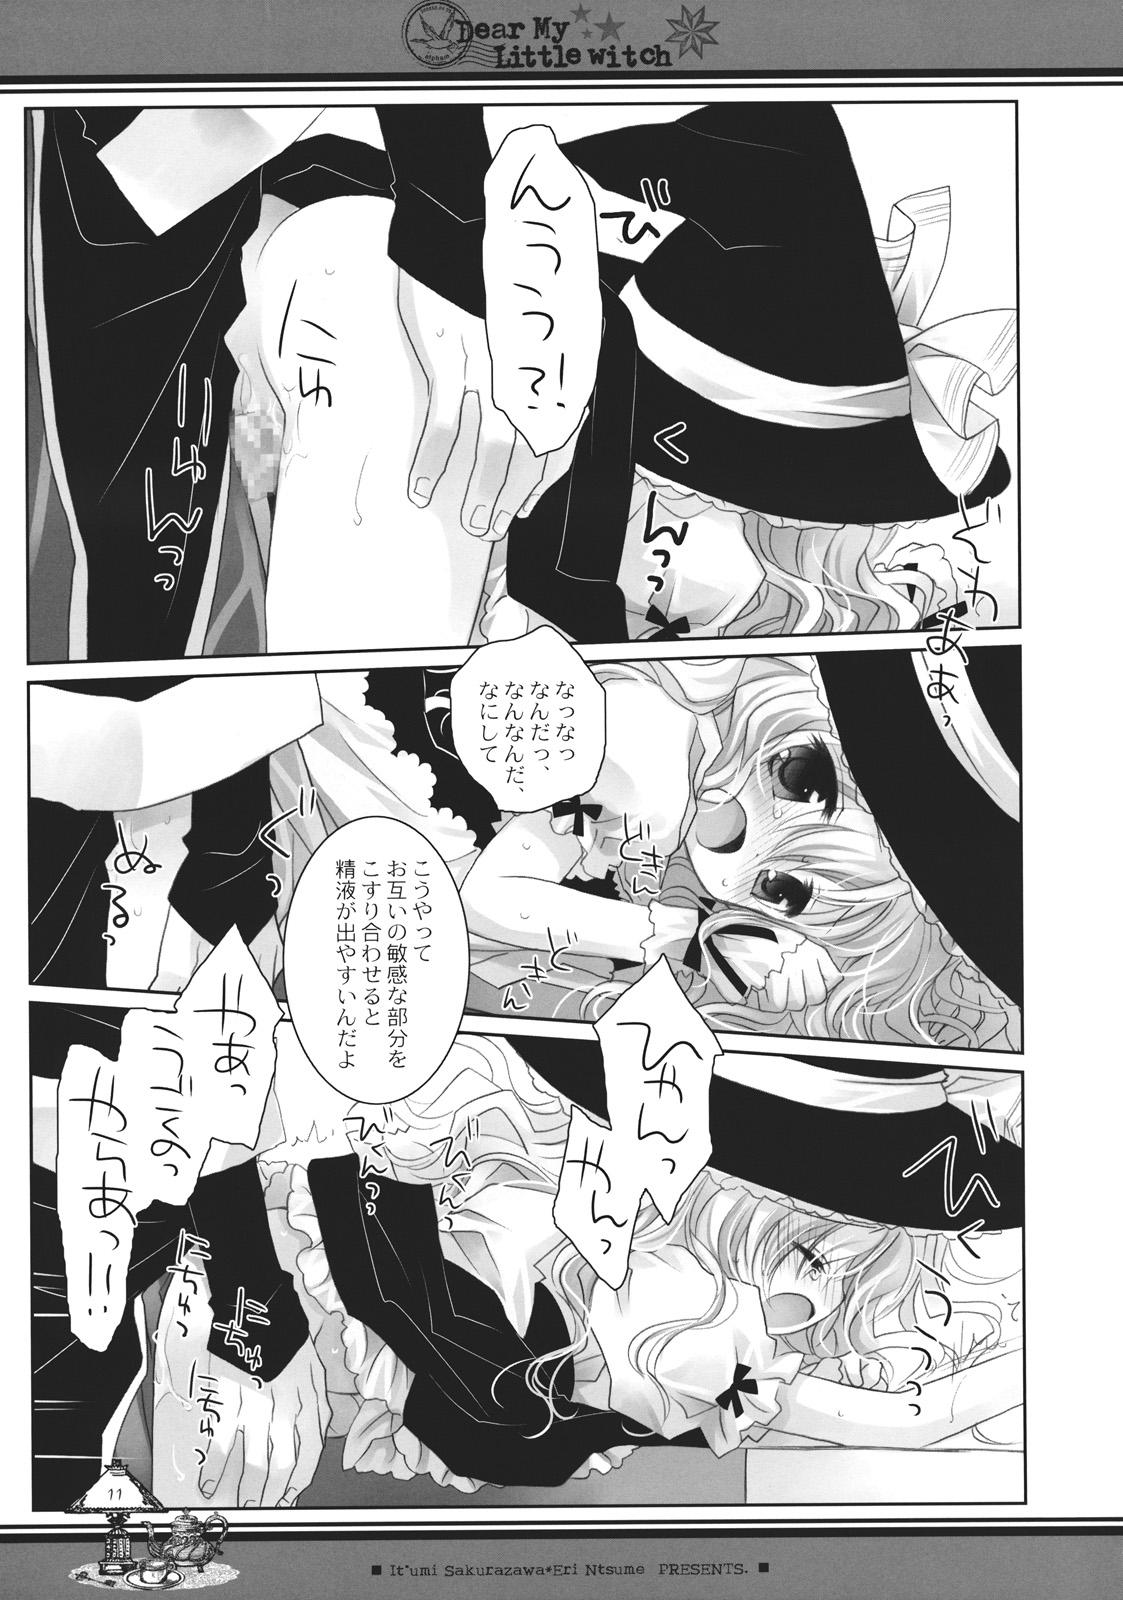 Soft Dear My Little Witch - Touhou project Hardcore Porno - Page 11